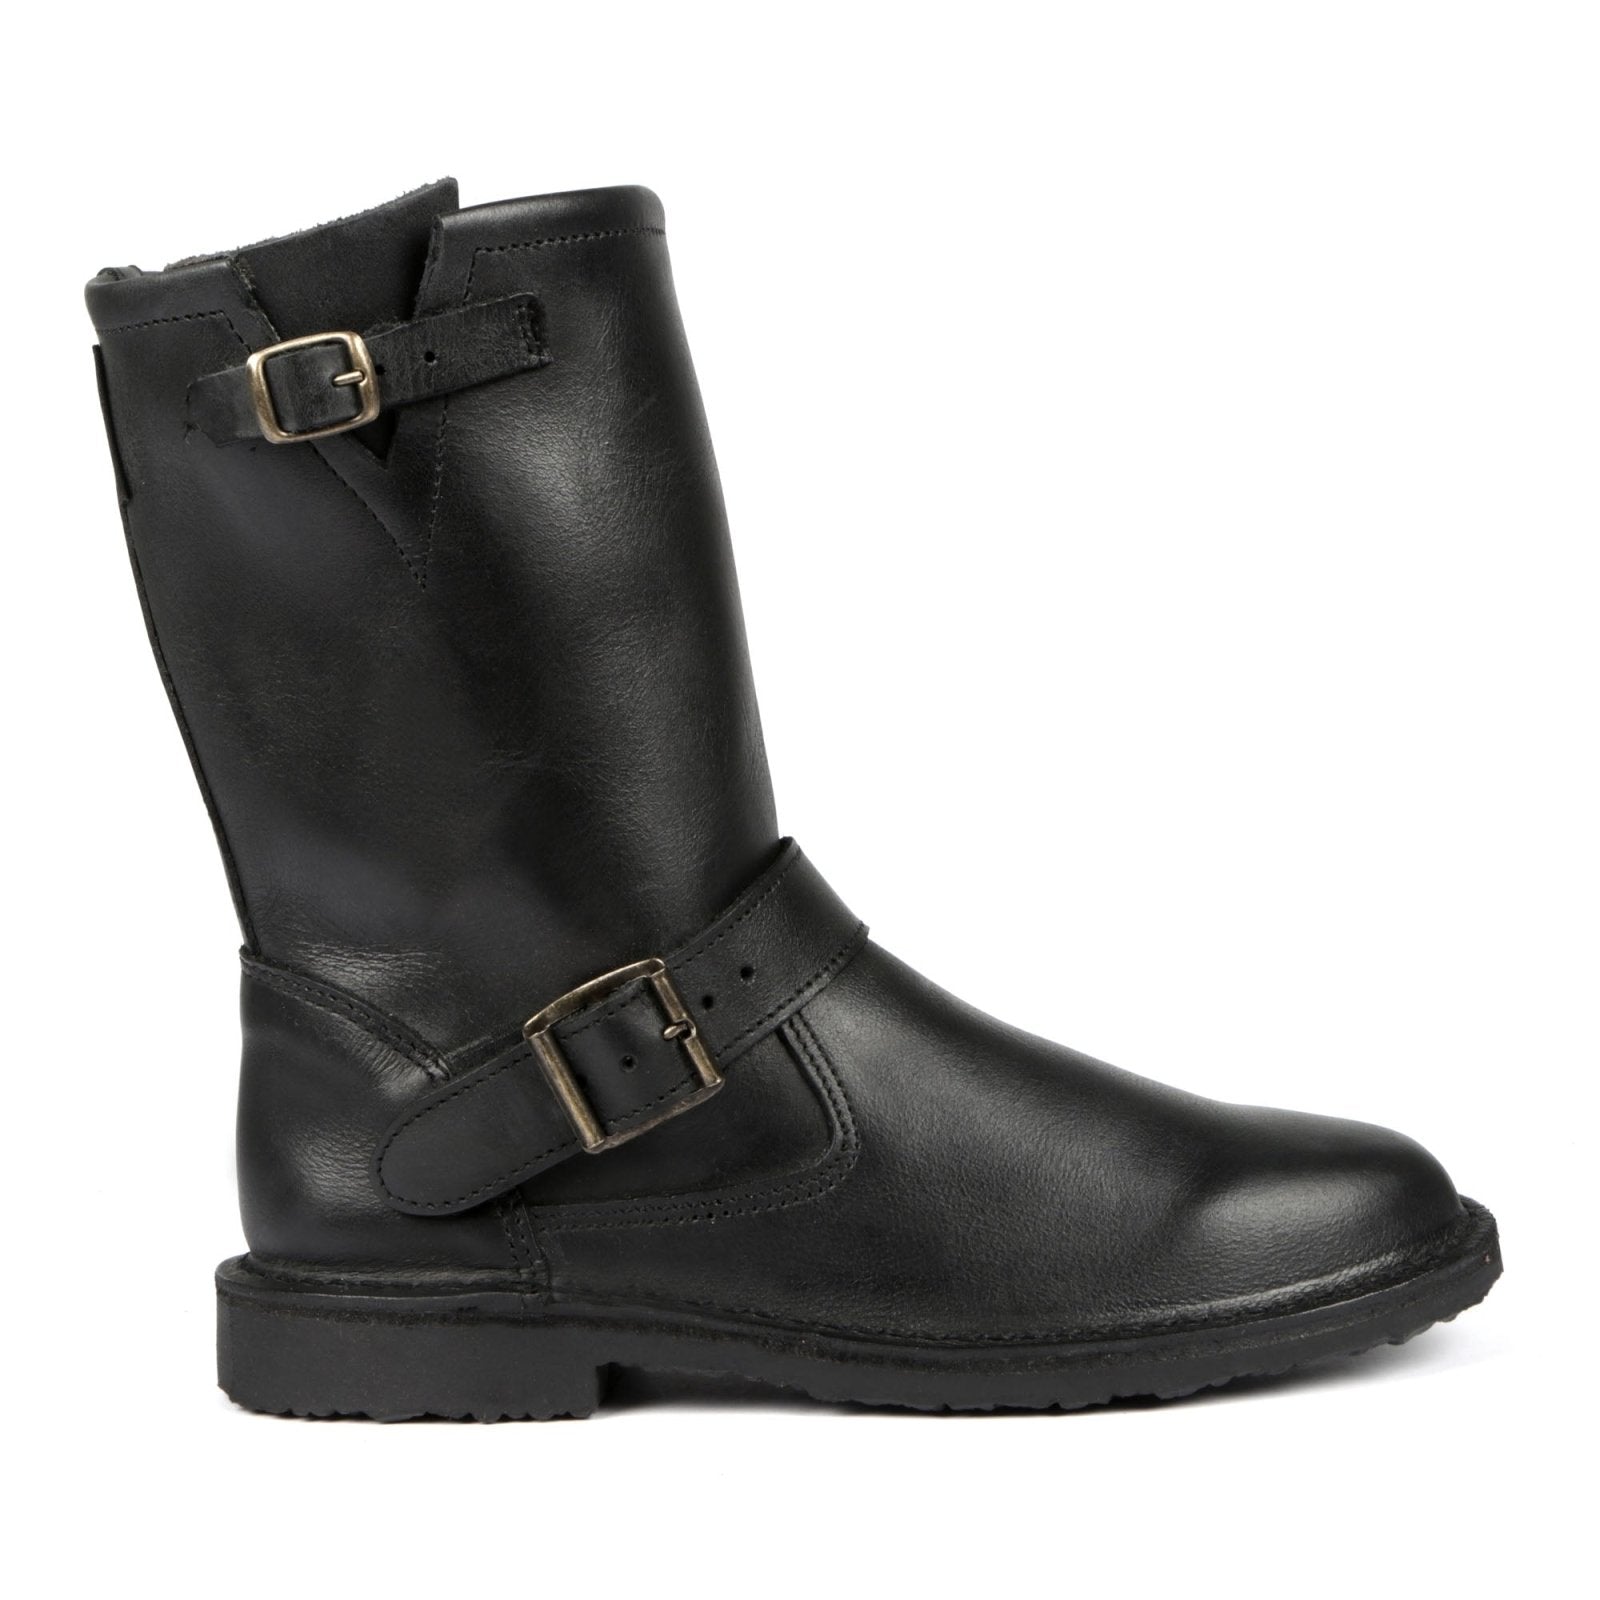 Claire Ladies Rigger Premium Leather Boot - Freestyle SA Proudly local leather boots veldskoens vellies leather shoes suede veldskoens